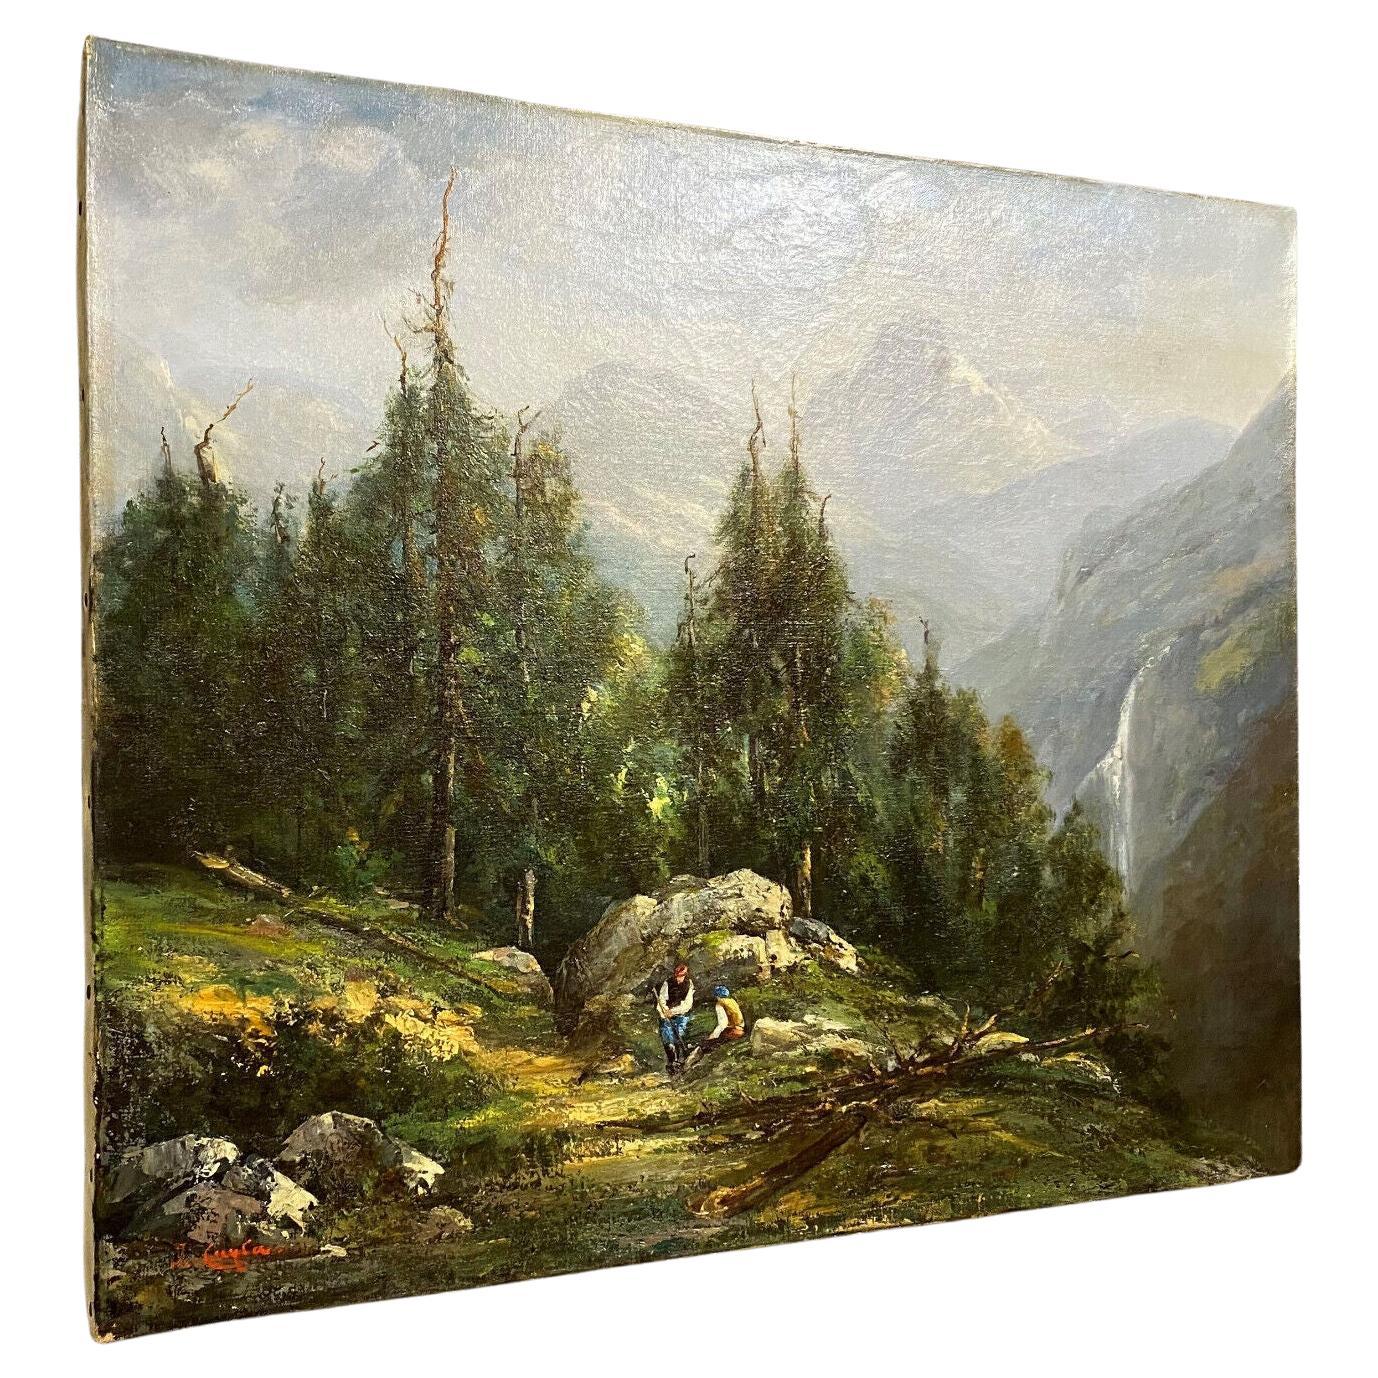 Swiss School Landscape Painting from the Late 19th to Early 20th Century -1X52